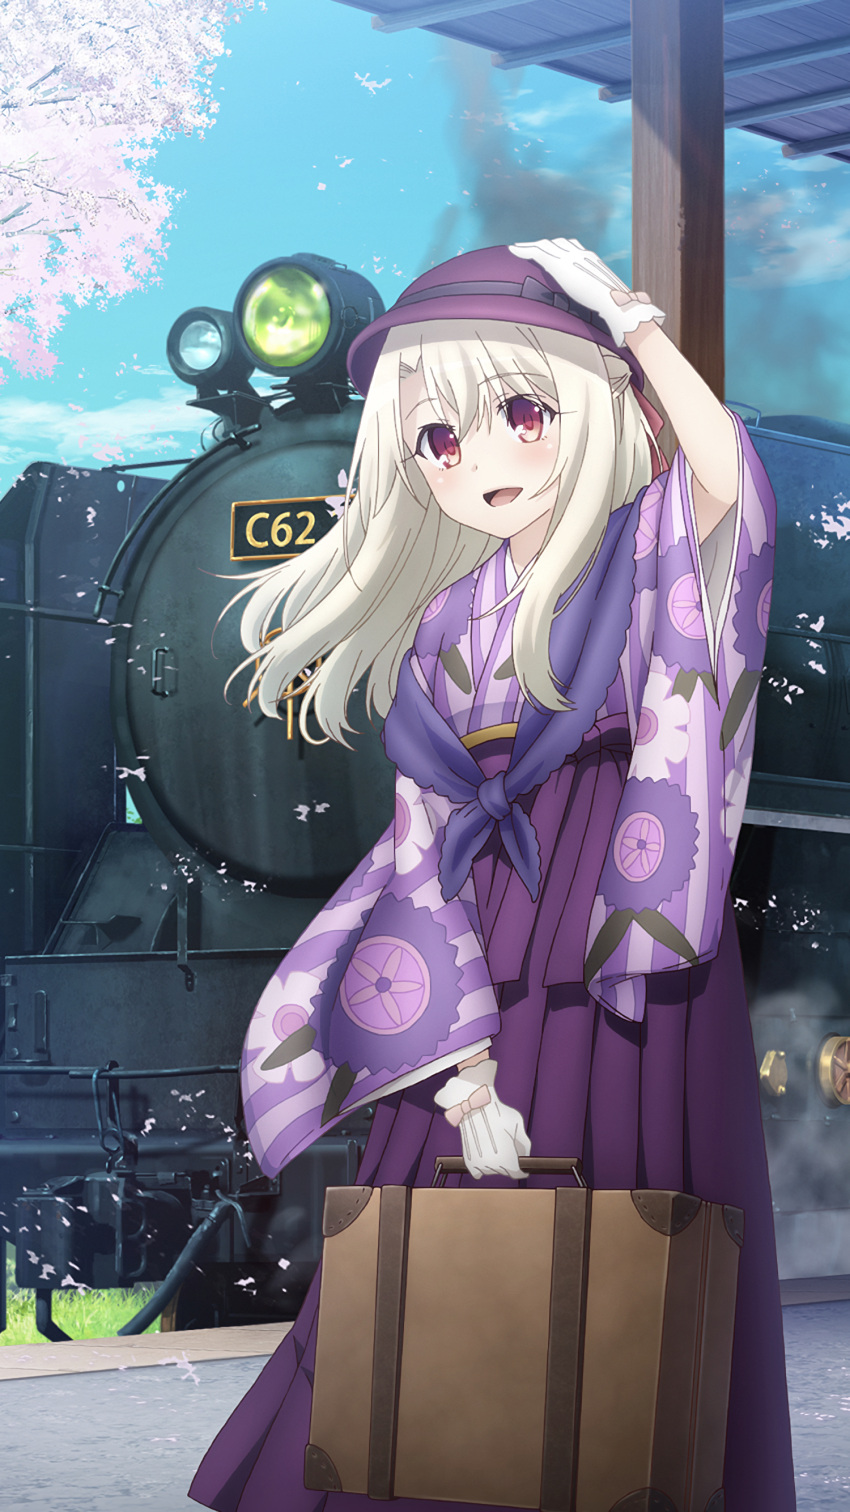 1girl :d absurdres bag blue_sky bow cherry_blossoms clouds day eyebrows_visible_through_hair fate/kaleid_liner_prisma_illya fate_(series) floral_print gloves ground_vehicle hair_between_eyes hakama hand_on_headwear hat highres holding holding_bag illyasviel_von_einzbern japanese_clothes kimono locomotive long_hair meiji_schoolgirl_uniform official_art open_mouth outdoors print_kimono purple_hakama purple_headwear purple_kimono red_eyes silver_hair sky smile solo standing steam_locomotive striped striped_kimono train train_station white_gloves